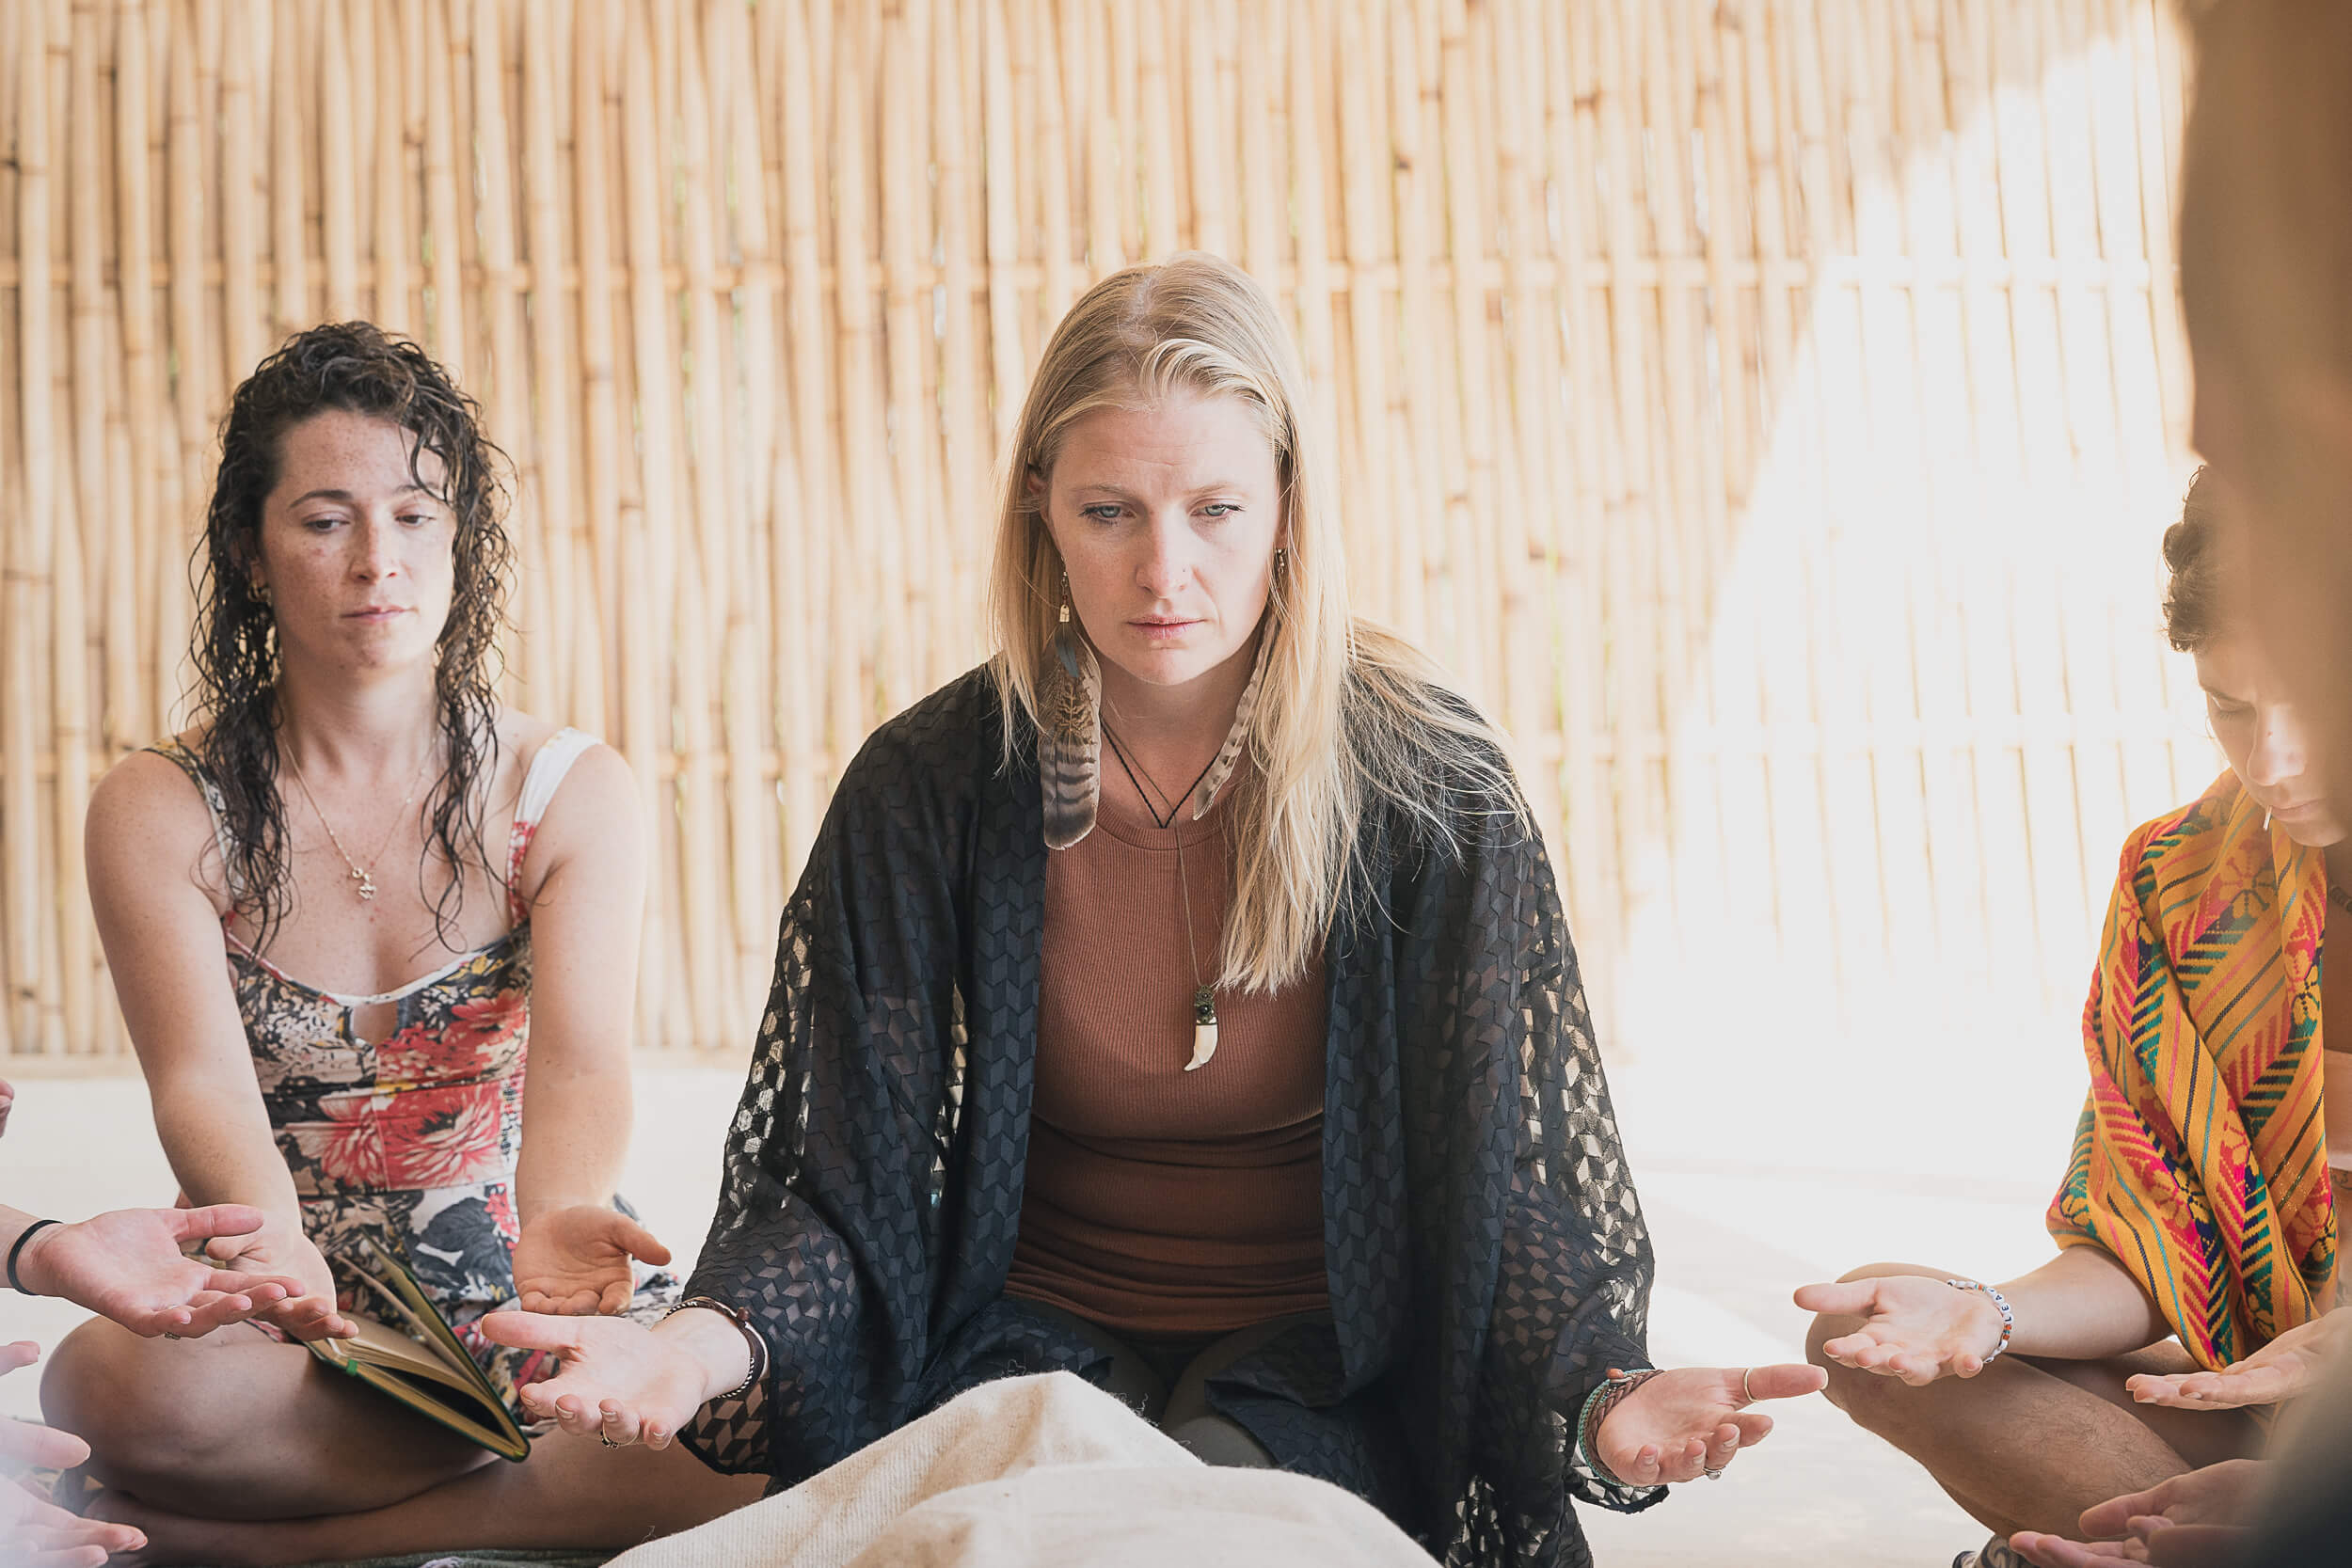 Three individuals engage in a serene meditation session, palms open in receiving mudra, in a space with bamboo background, reflecting the mindful ambiance of Shala Yoga studio in Squamish.